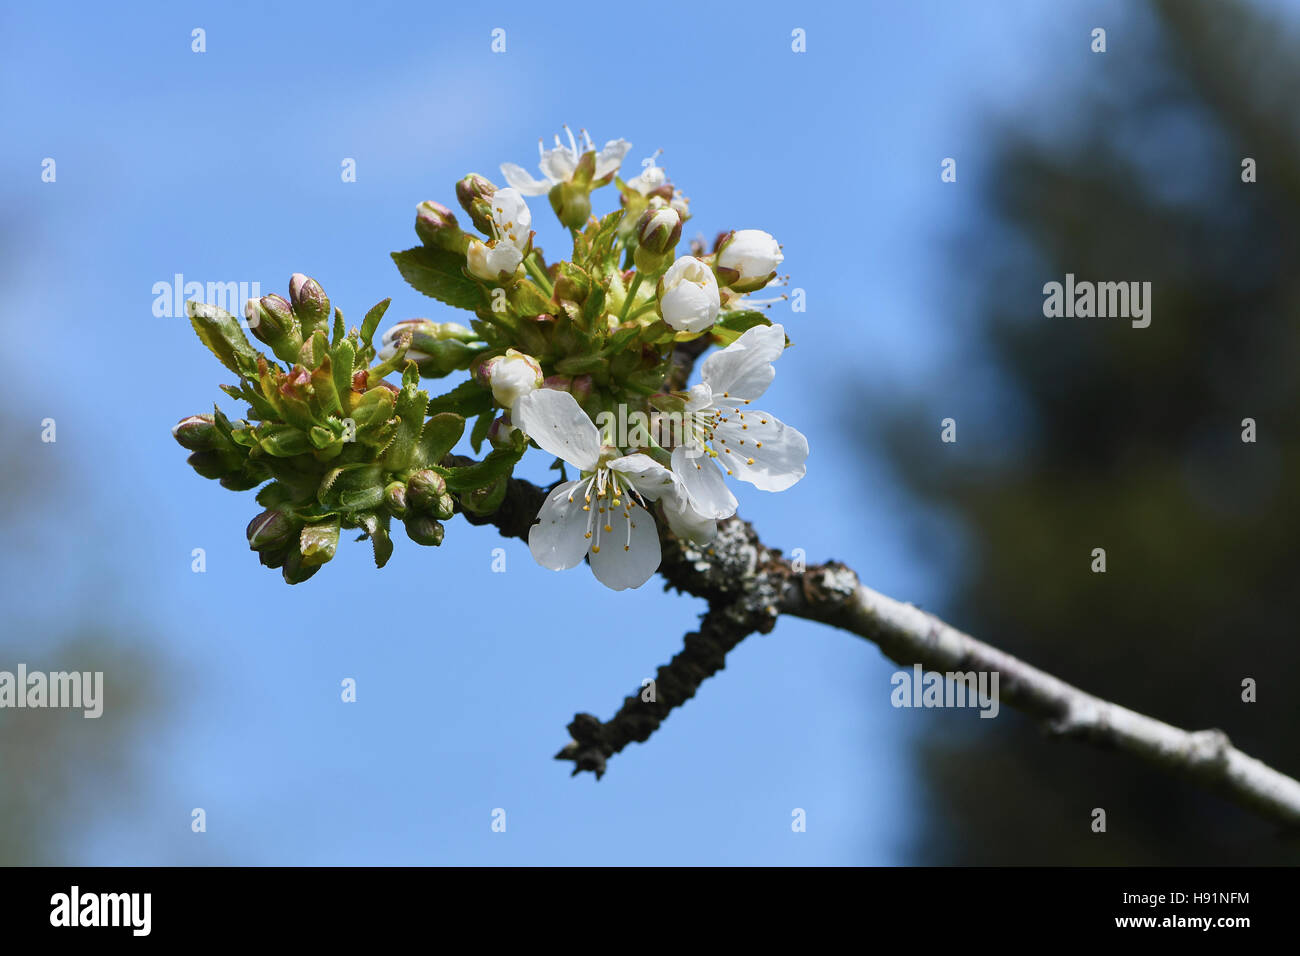 Tight clusters of apple blossom adorn the tip of an apple tree branch Stock Photo